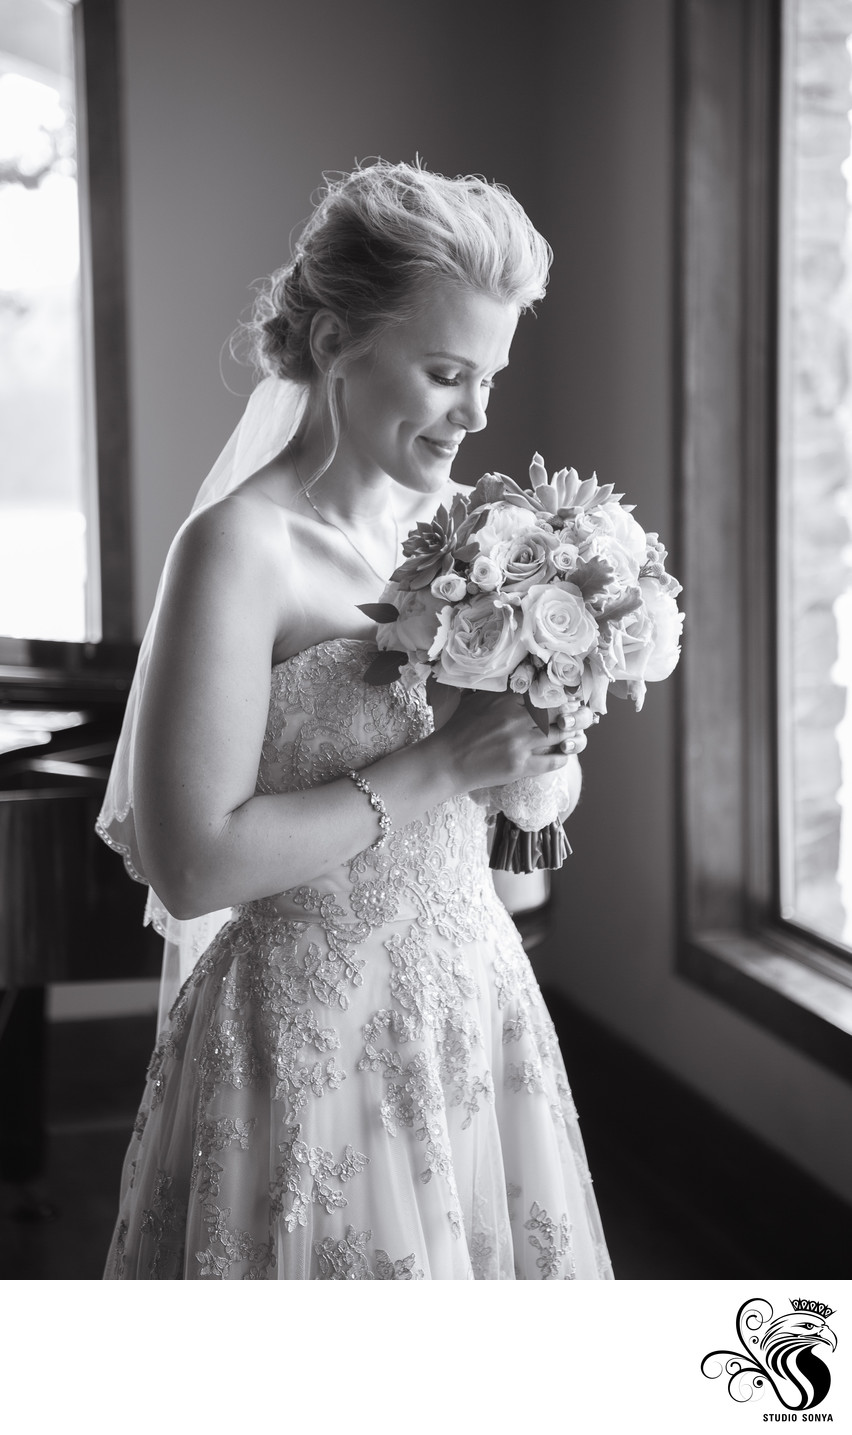 Black & White photo of Bride with Bouquet